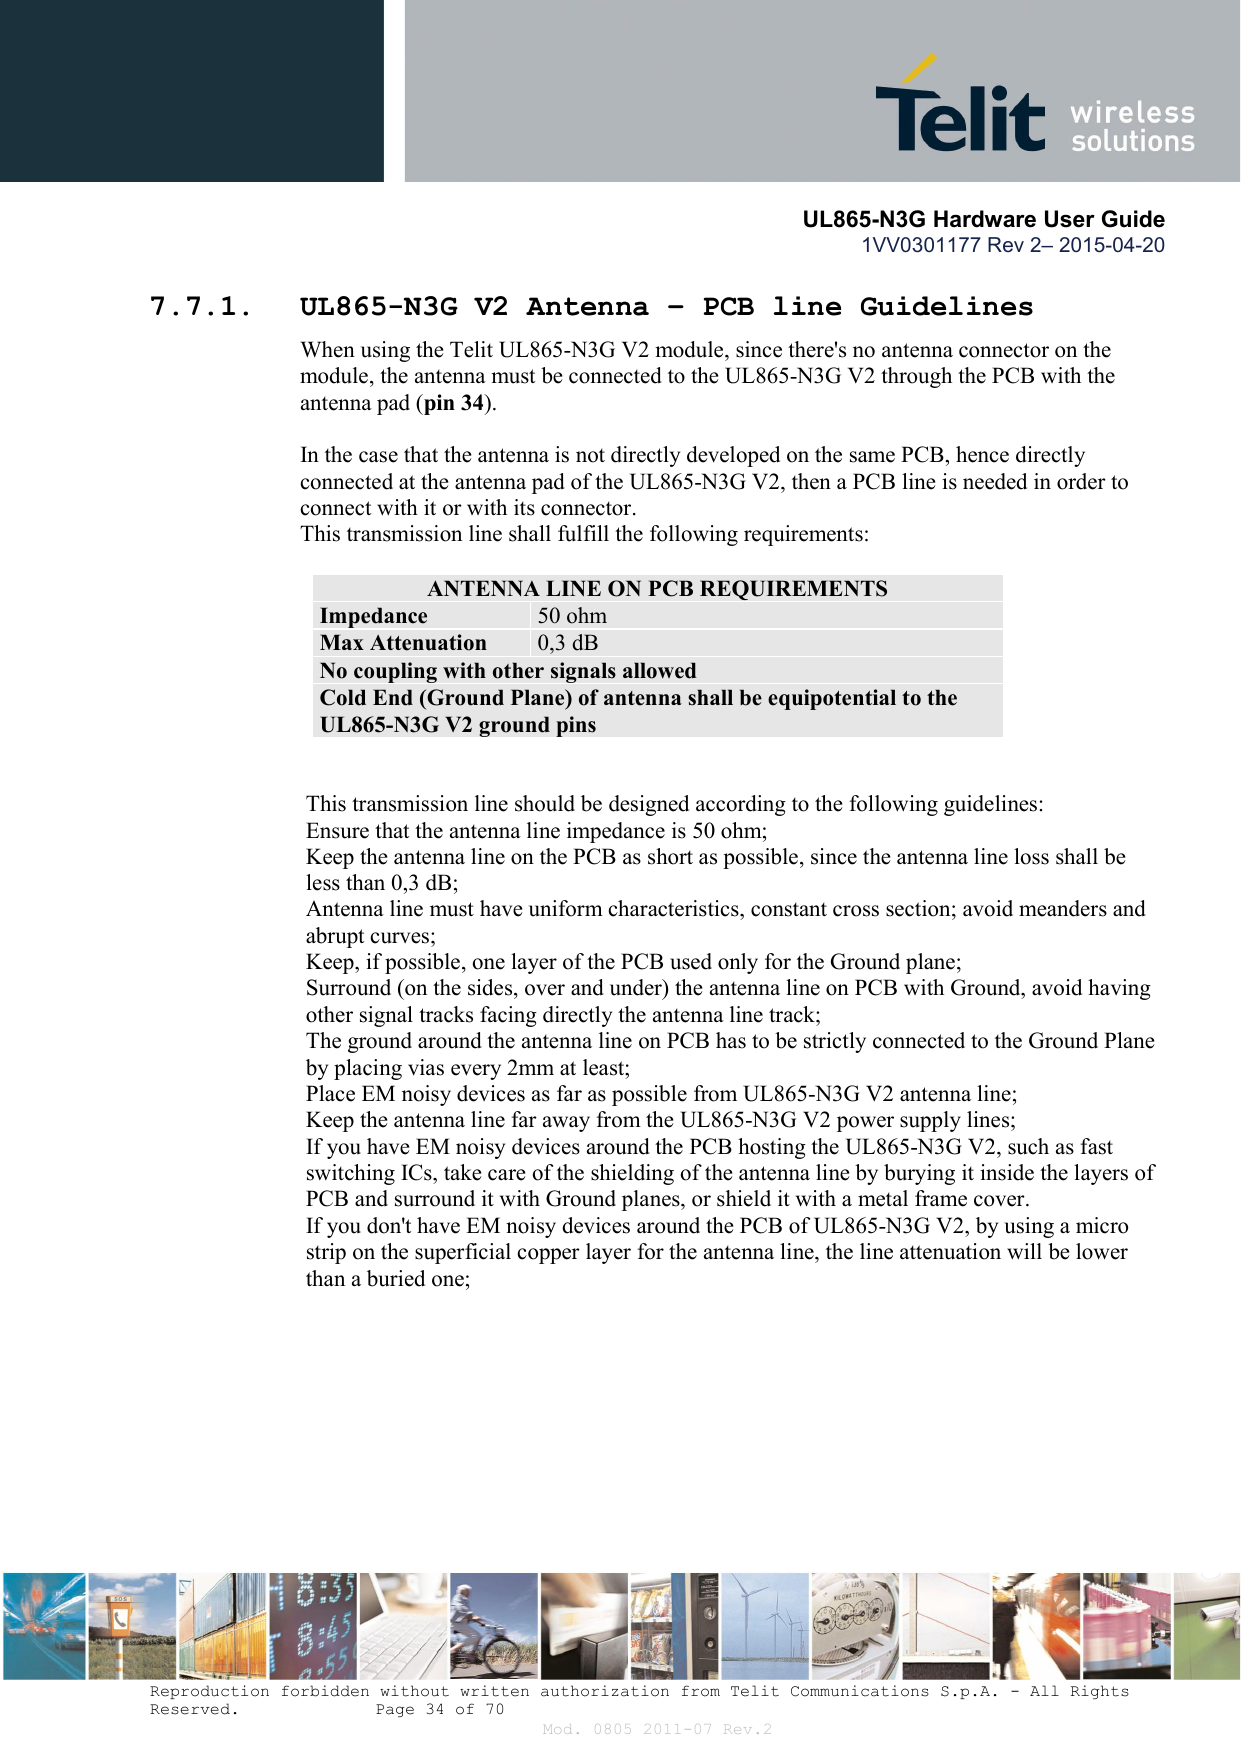       UL865-N3G Hardware User Guide 1VV0301177 Rev 2– 2015-04-20  Reproduction forbidden without written authorization from Telit Communications S.p.A. - All Rights Reserved.    Page 34 of 70 Mod. 0805 2011-07 Rev.2 7.7.1. UL865-N3G V2 Antenna – PCB line Guidelines When using the Telit UL865-N3G V2 module, since there&apos;s no antenna connector on the module, the antenna must be connected to the UL865-N3G V2 through the PCB with the antenna pad (pin 34).  In the case that the antenna is not directly developed on the same PCB, hence directly connected at the antenna pad of the UL865-N3G V2, then a PCB line is needed in order to connect with it or with its connector.  This transmission line shall fulfill the following requirements:  ANTENNA LINE ON PCB REQUIREMENTS Impedance  50 ohm Max Attenuation  0,3 dB No coupling with other signals allowed Cold End (Ground Plane) of antenna shall be equipotential to the UL865-N3G V2 ground pins   This transmission line should be designed according to the following guidelines: Ensure that the antenna line impedance is 50 ohm; Keep the antenna line on the PCB as short as possible, since the antenna line loss shall be less than 0,3 dB; Antenna line must have uniform characteristics, constant cross section; avoid meanders and abrupt curves; Keep, if possible, one layer of the PCB used only for the Ground plane; Surround (on the sides, over and under) the antenna line on PCB with Ground, avoid having other signal tracks facing directly the antenna line track; The ground around the antenna line on PCB has to be strictly connected to the Ground Plane by placing vias every 2mm at least; Place EM noisy devices as far as possible from UL865-N3G V2 antenna line; Keep the antenna line far away from the UL865-N3G V2 power supply lines; If you have EM noisy devices around the PCB hosting the UL865-N3G V2, such as fast switching ICs, take care of the shielding of the antenna line by burying it inside the layers of PCB and surround it with Ground planes, or shield it with a metal frame cover. If you don&apos;t have EM noisy devices around the PCB of UL865-N3G V2, by using a micro strip on the superficial copper layer for the antenna line, the line attenuation will be lower than a buried one;  